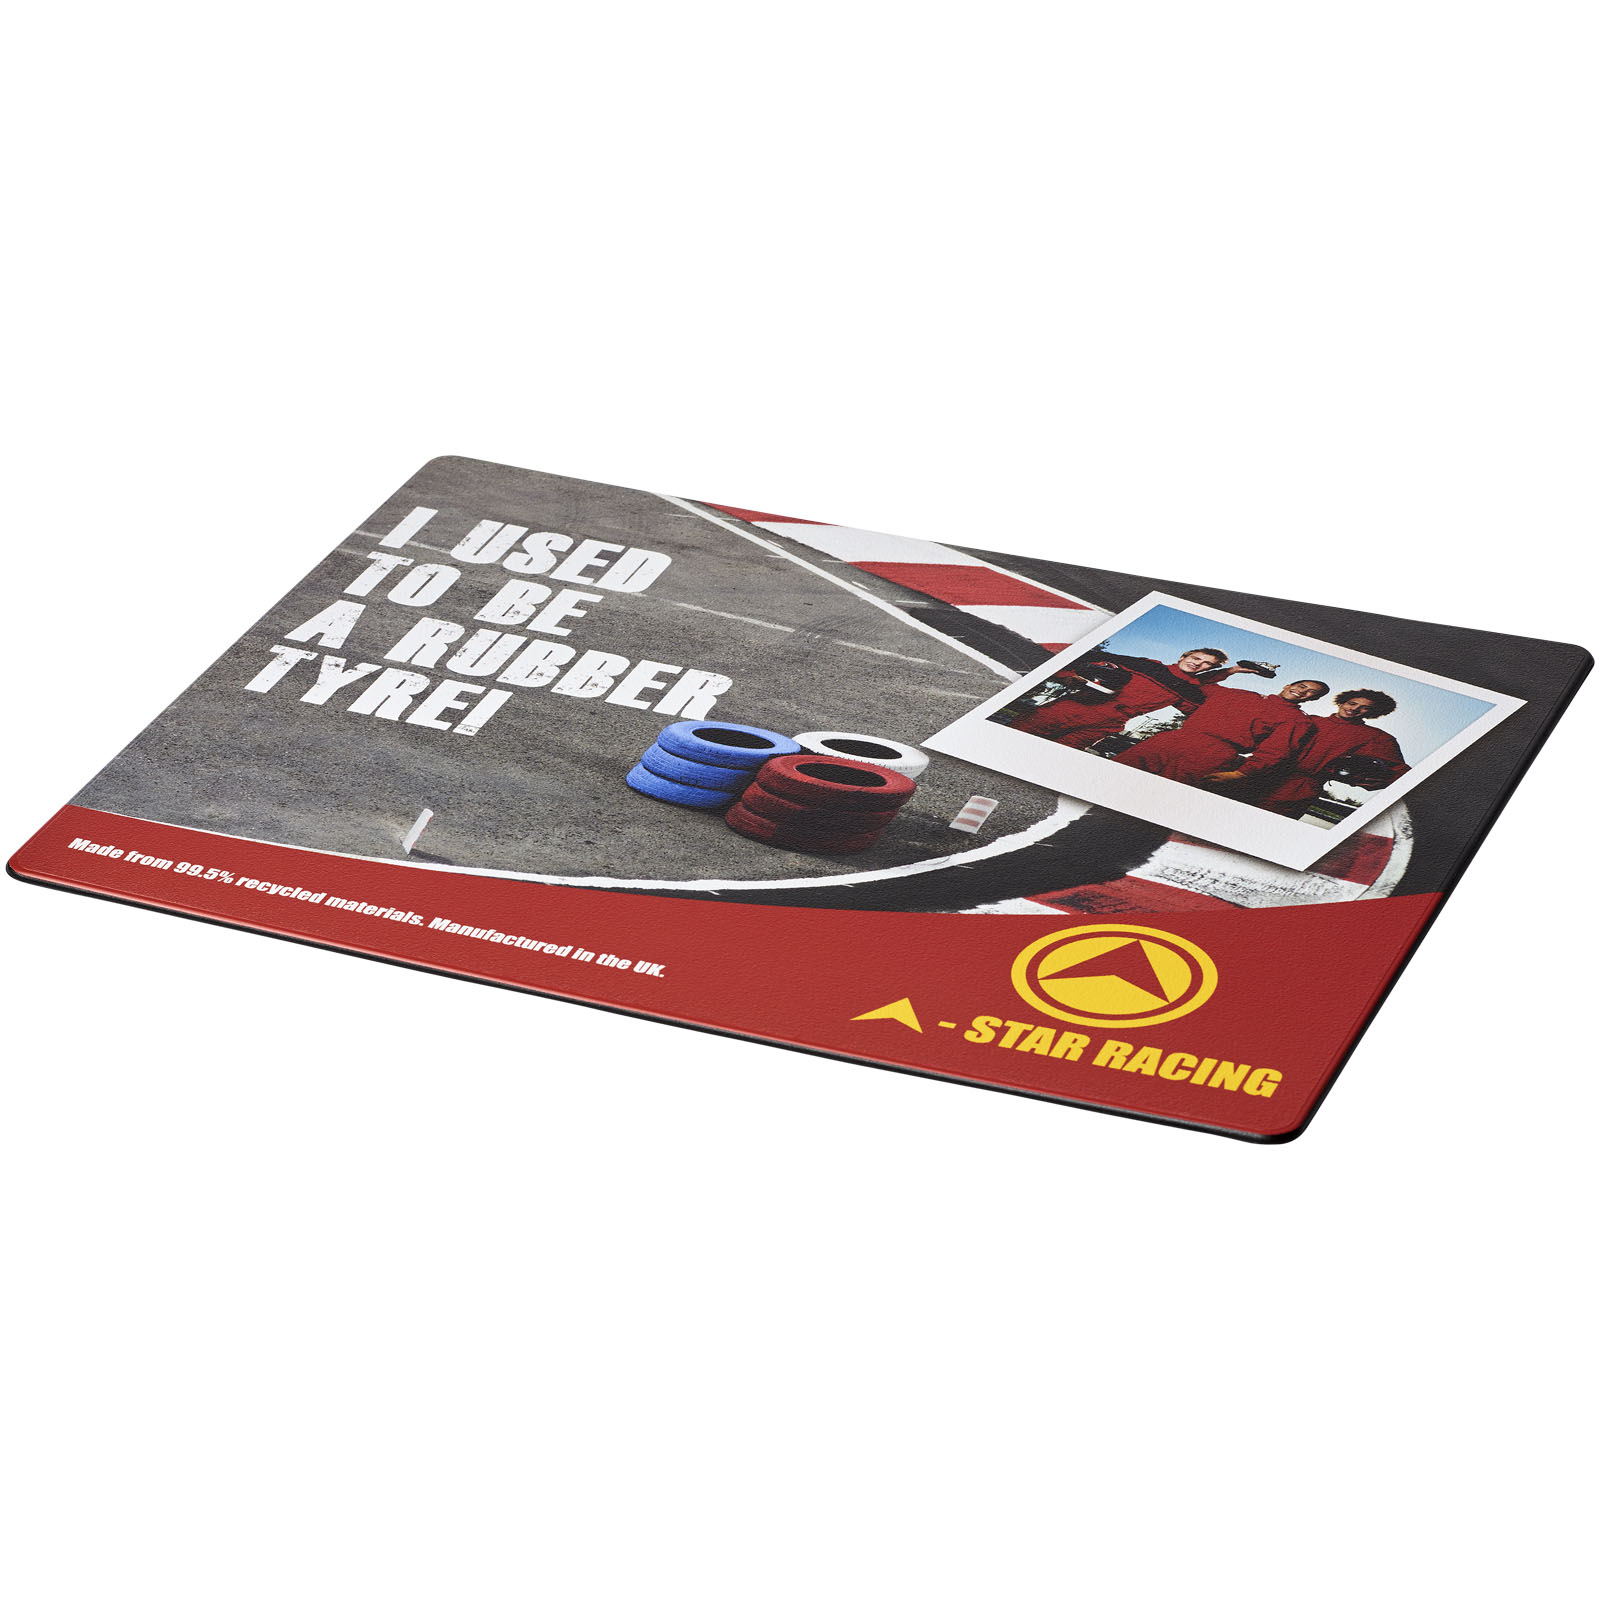 Technology - Brite-Mat® mouse mat with tyre material